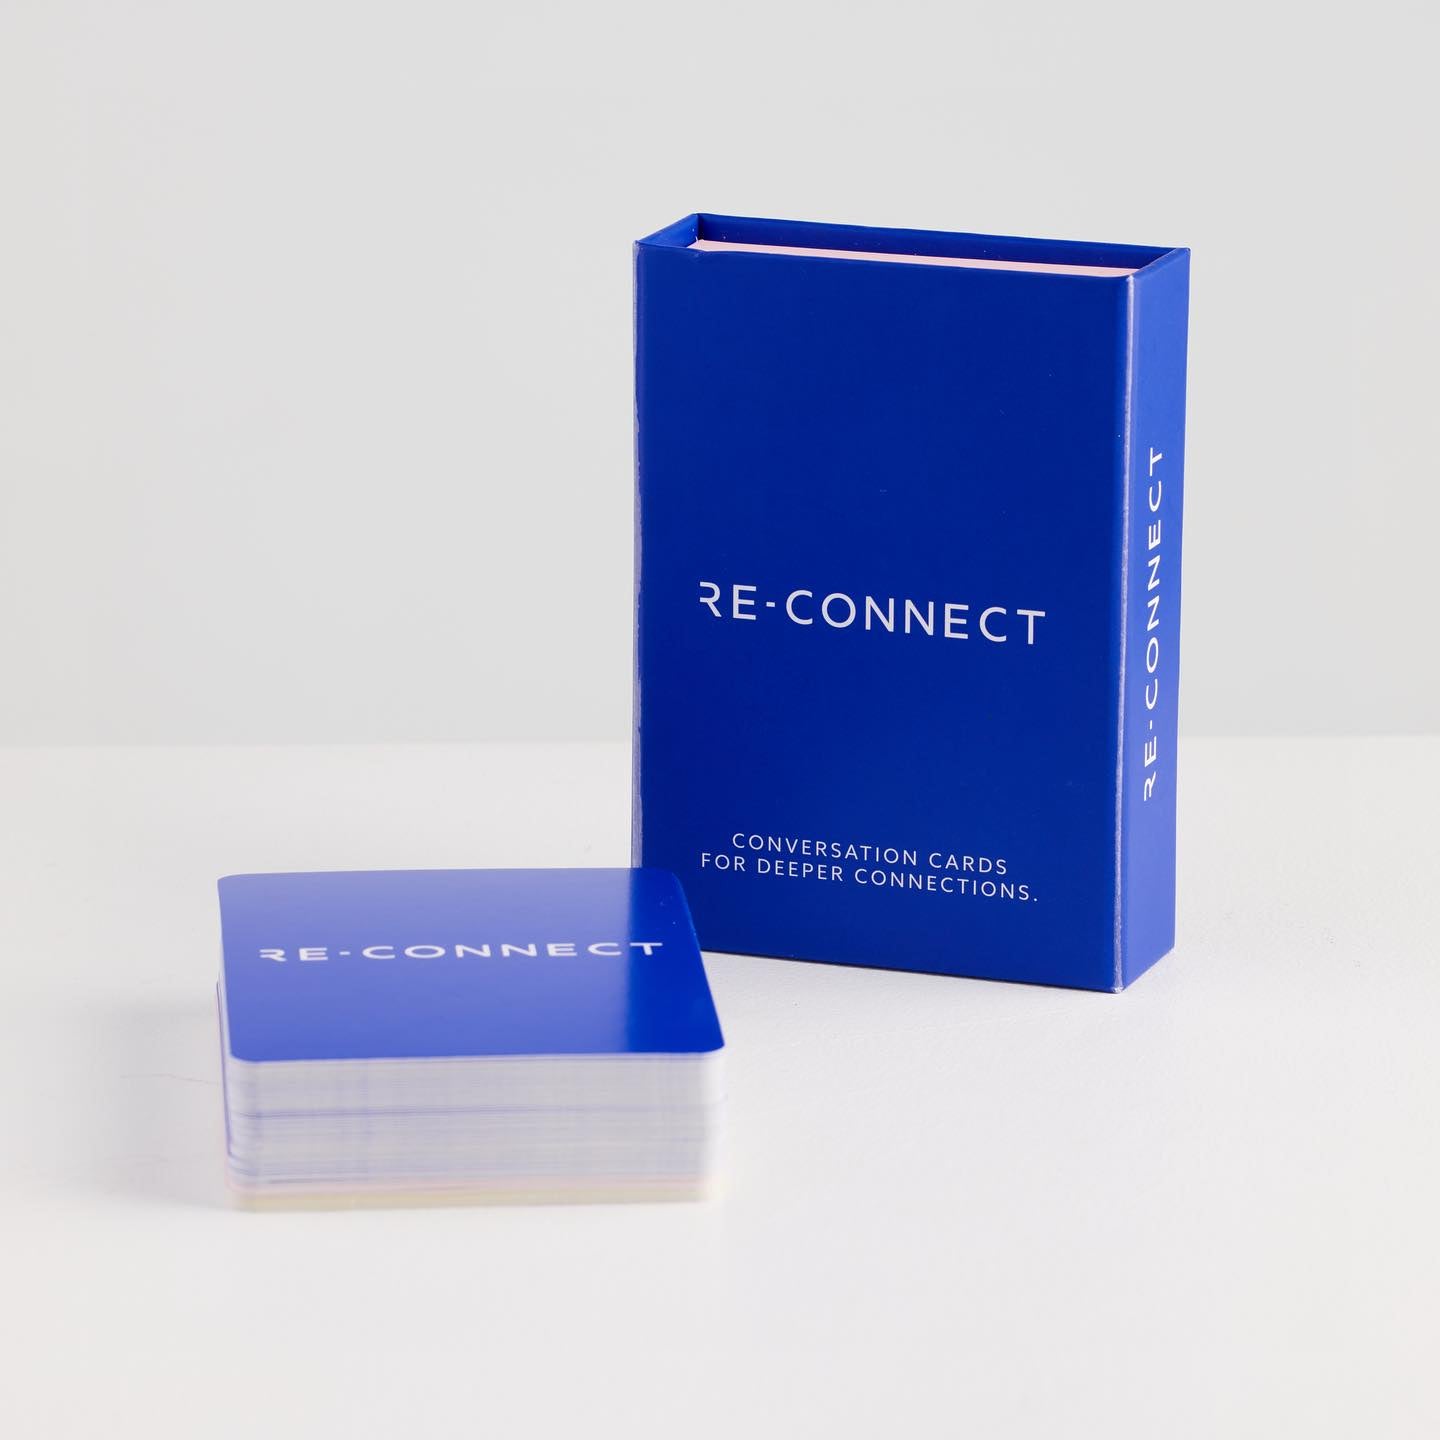 RE-CONNECT - Conversation Cards for Deeper Connections